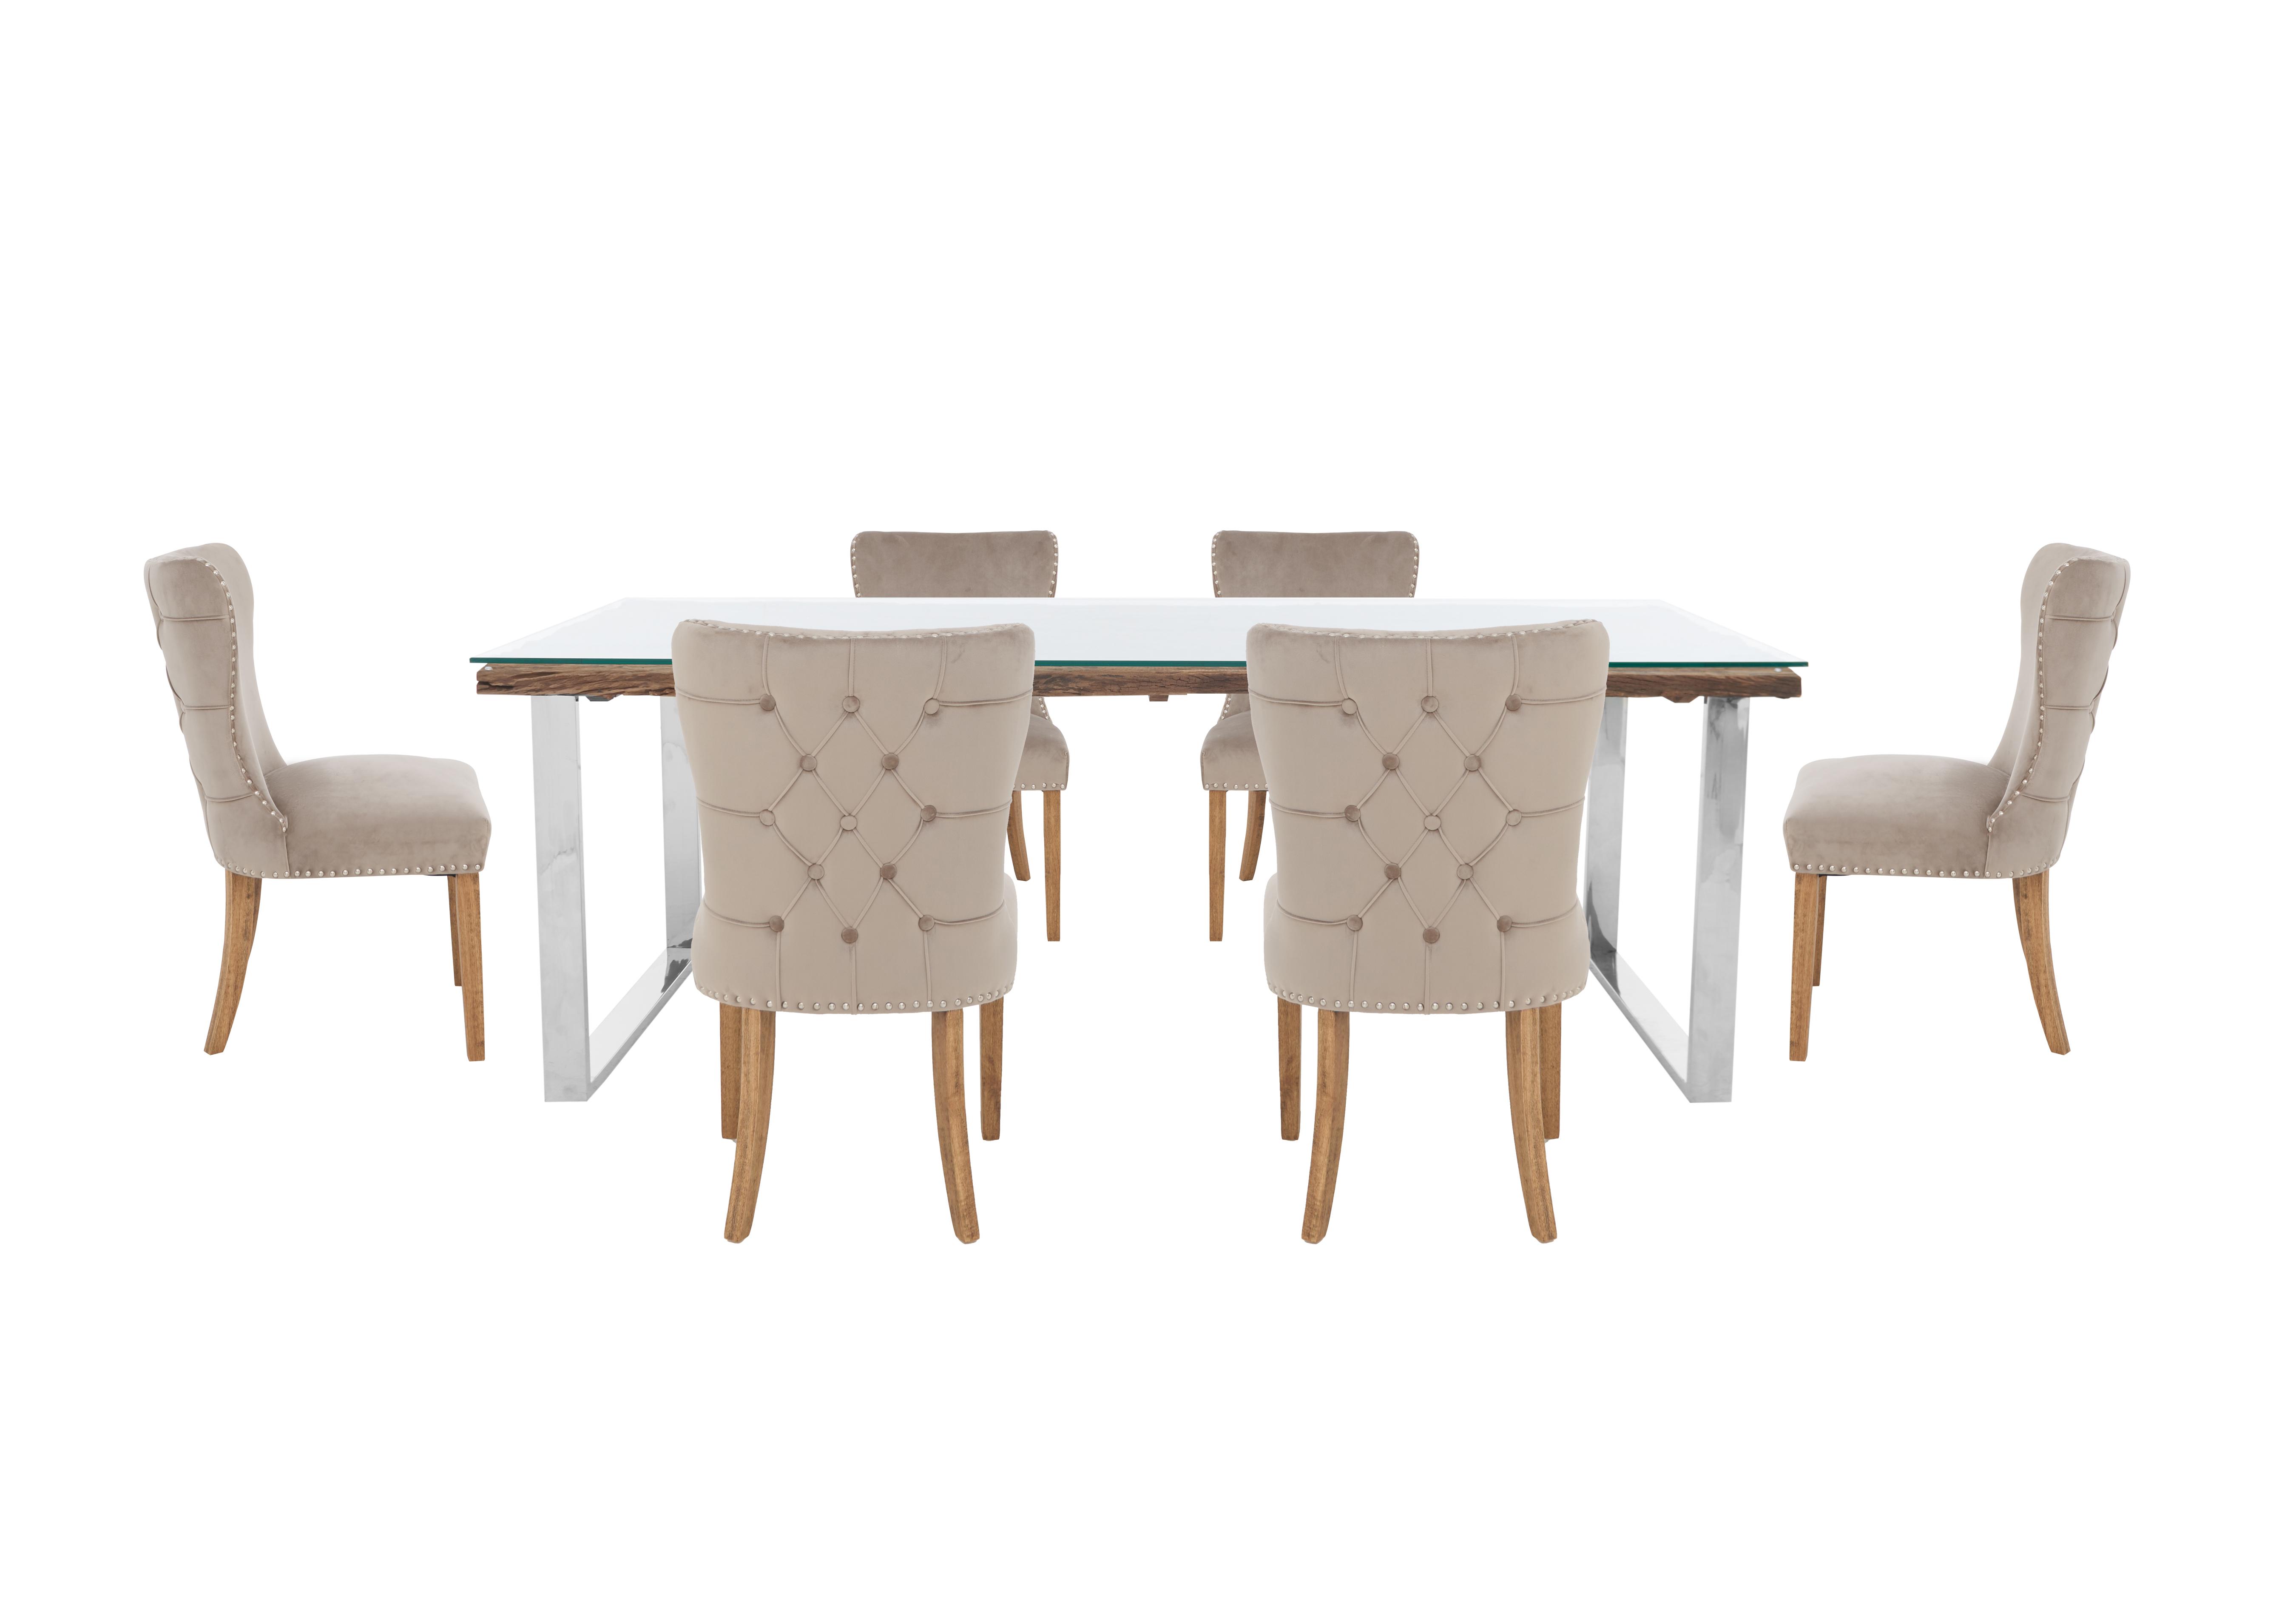 Chennai Dining Table with U-Leg Base and 6 Luxe Dining Chairs in Taupe on Furniture Village